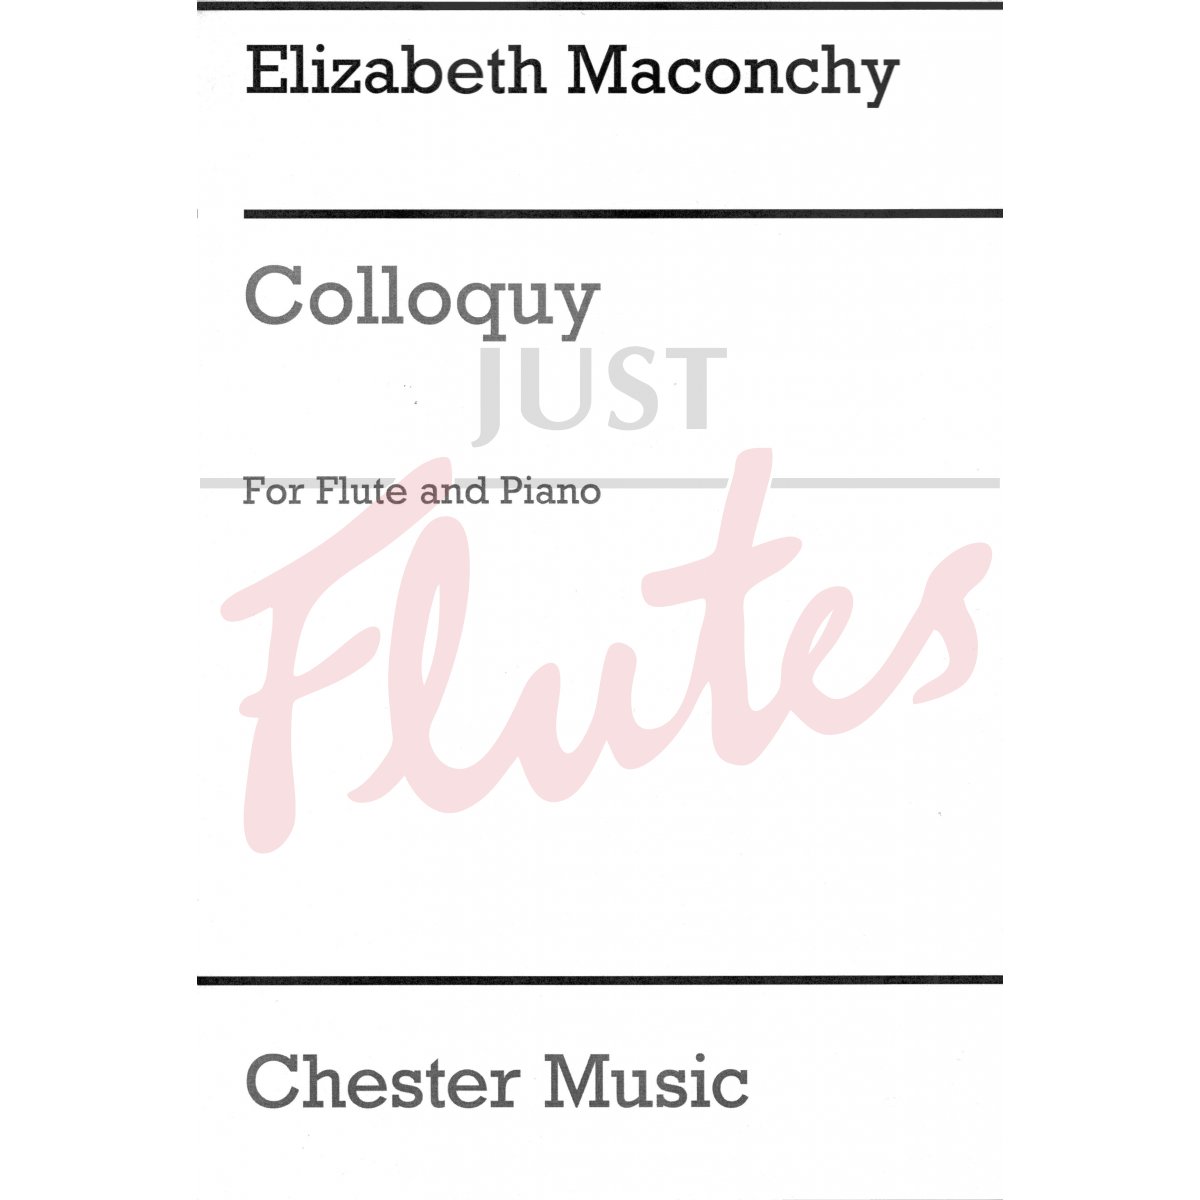 Colloquy for Flute and Piano